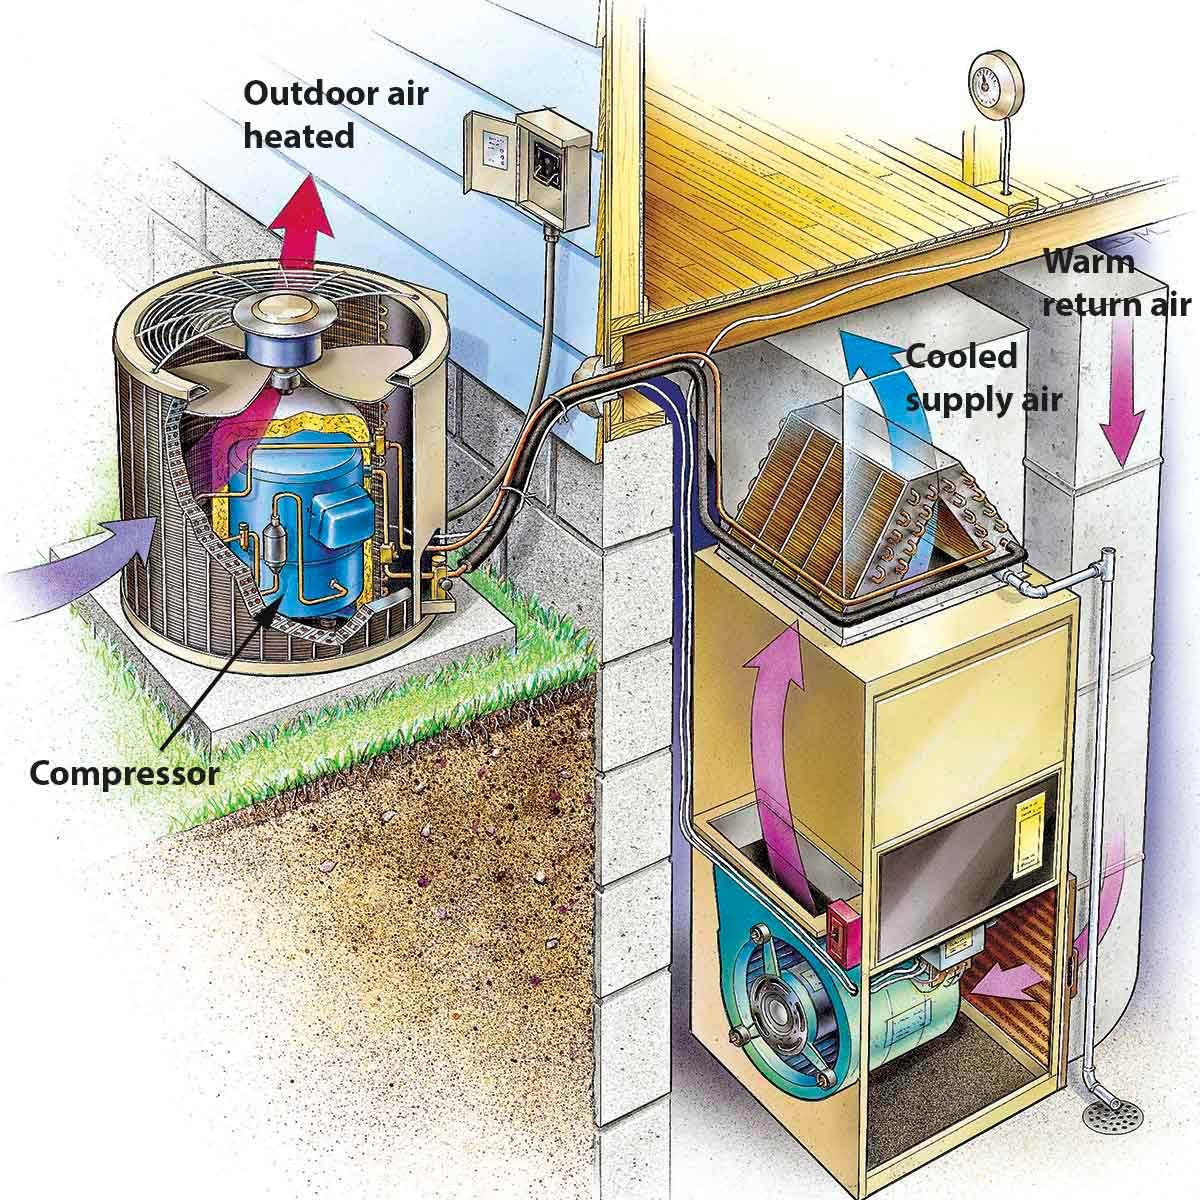 How To Identify Your Hvac System - Image to u